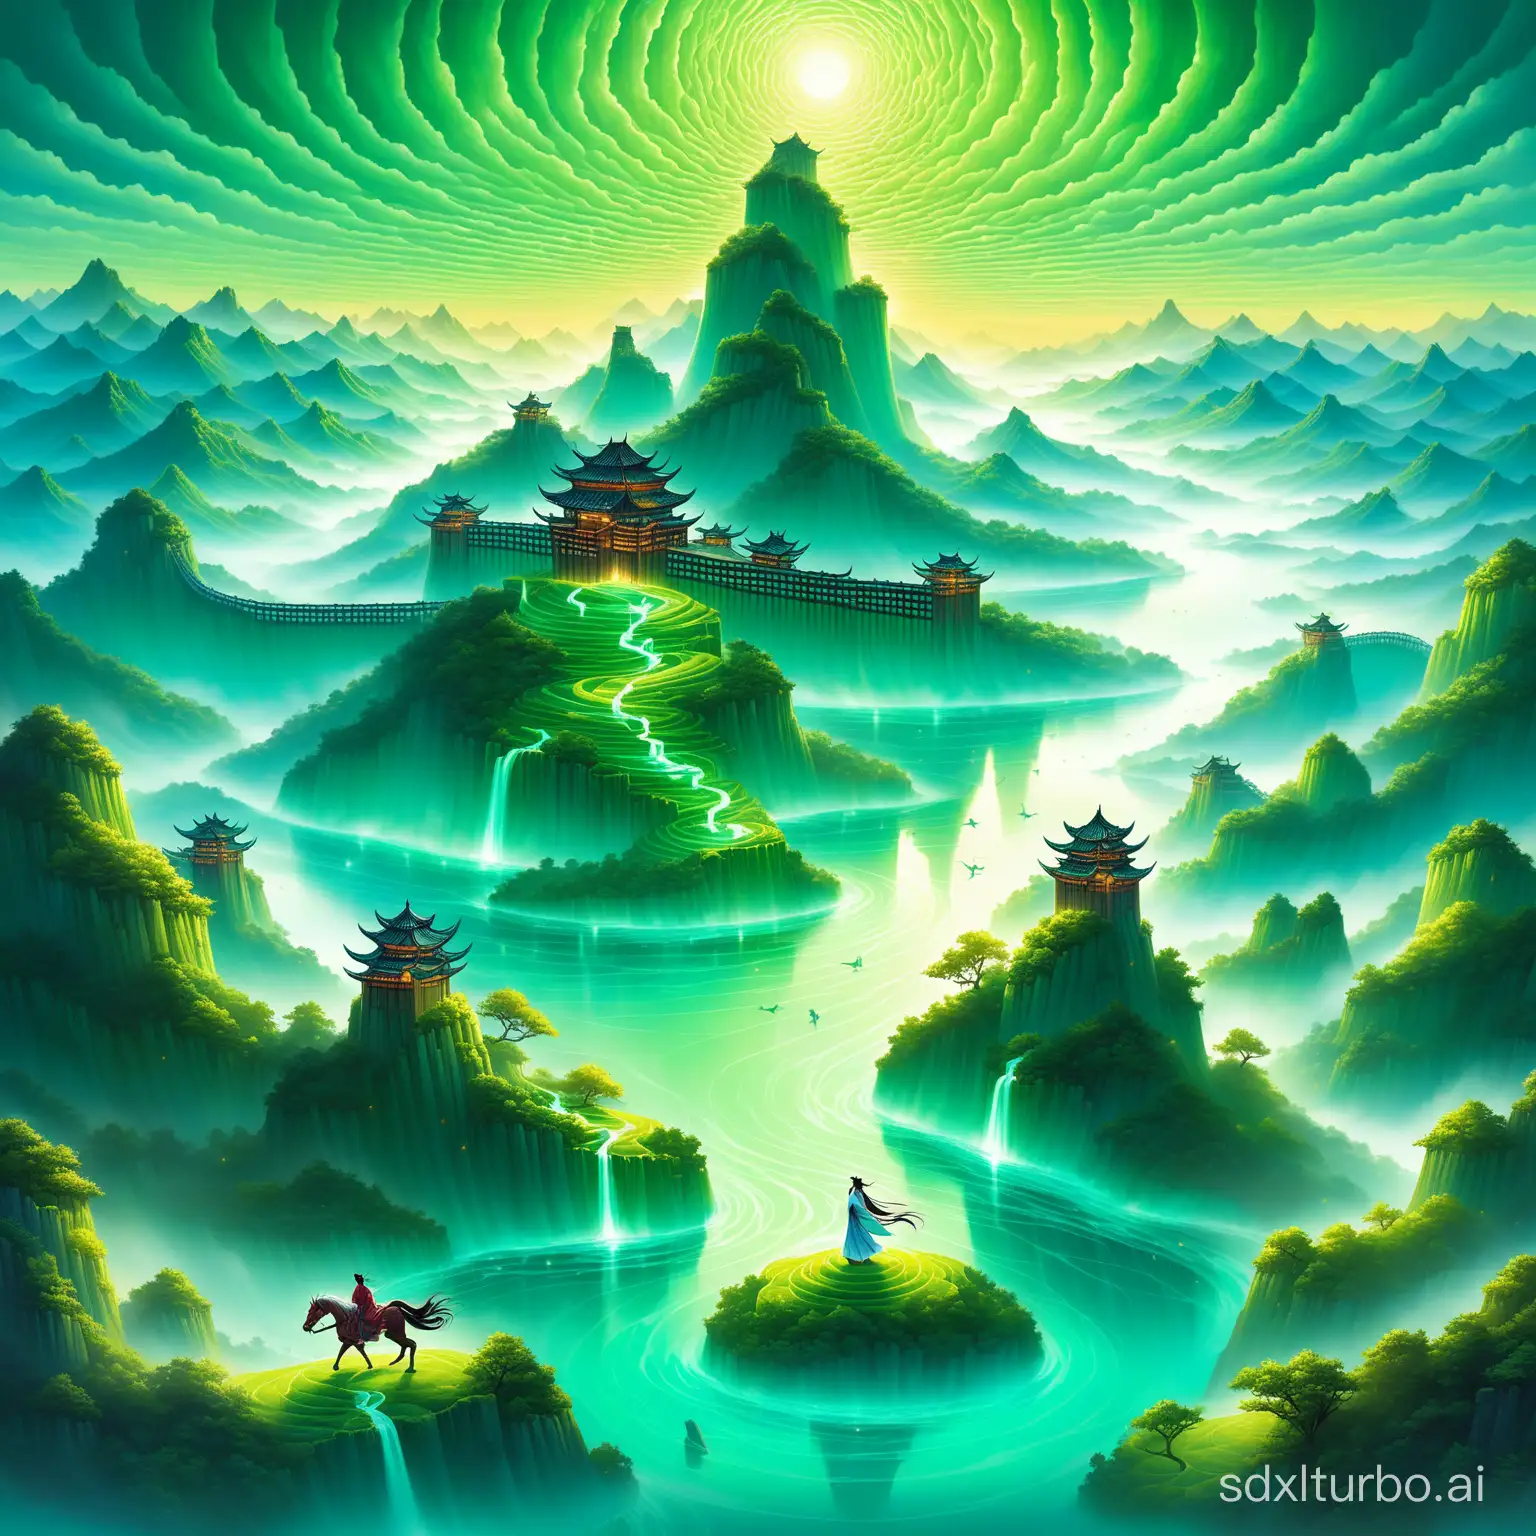 Epic-Wuxia-Scene-with-Dragons-and-Verdant-Mountains